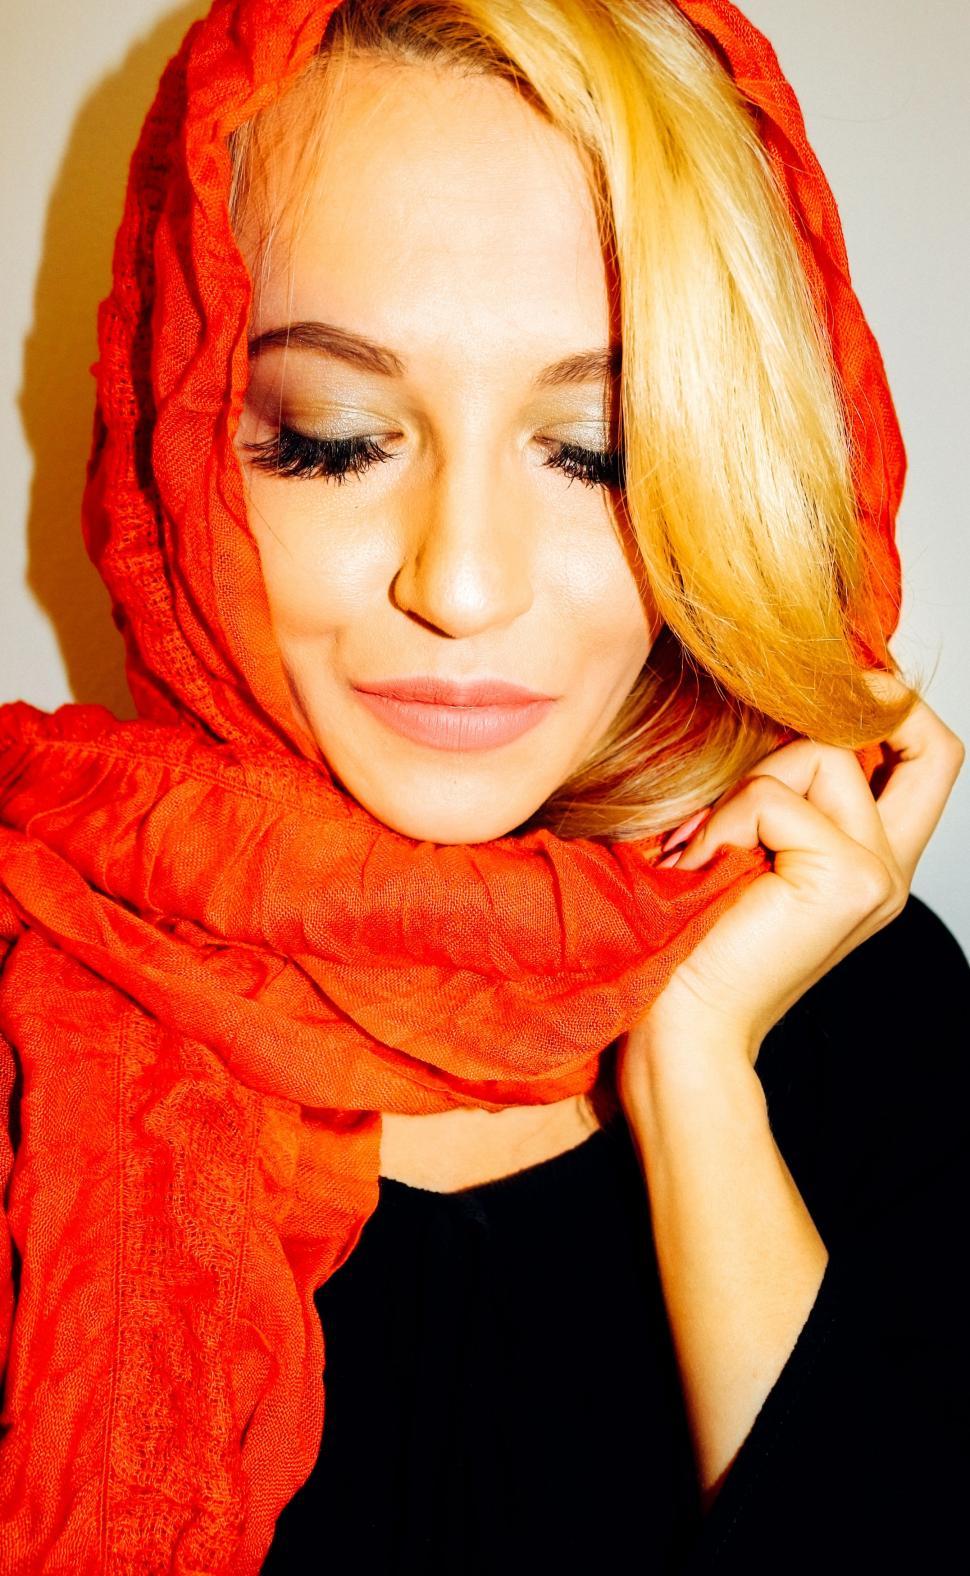 Free Image of Smiling Woman with orange scarf 